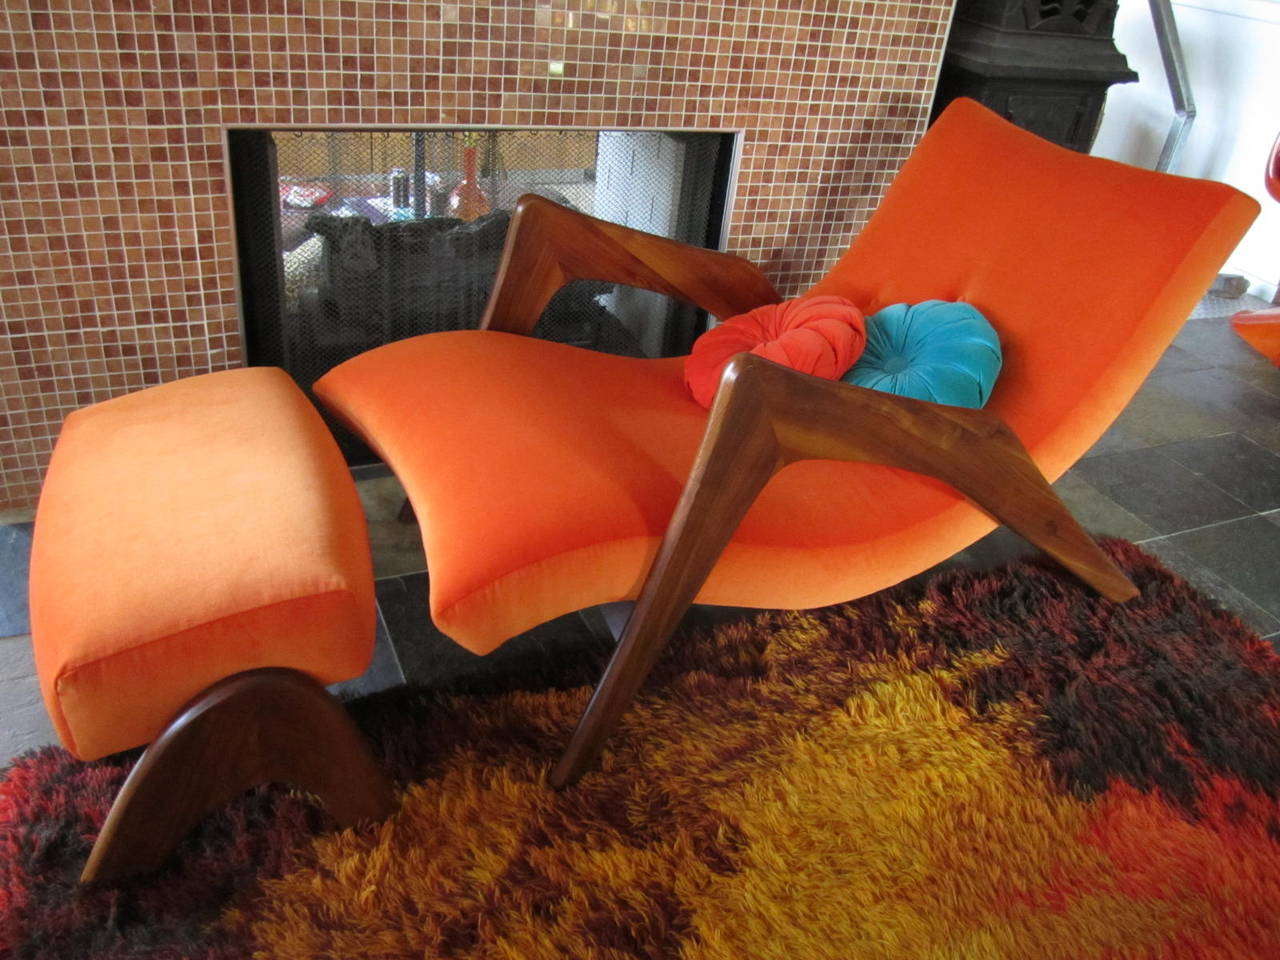 Mid-Century Modern Adrian Pearsall “Grasshopper” Chaise Lounge with Ottoman for Craft Associates